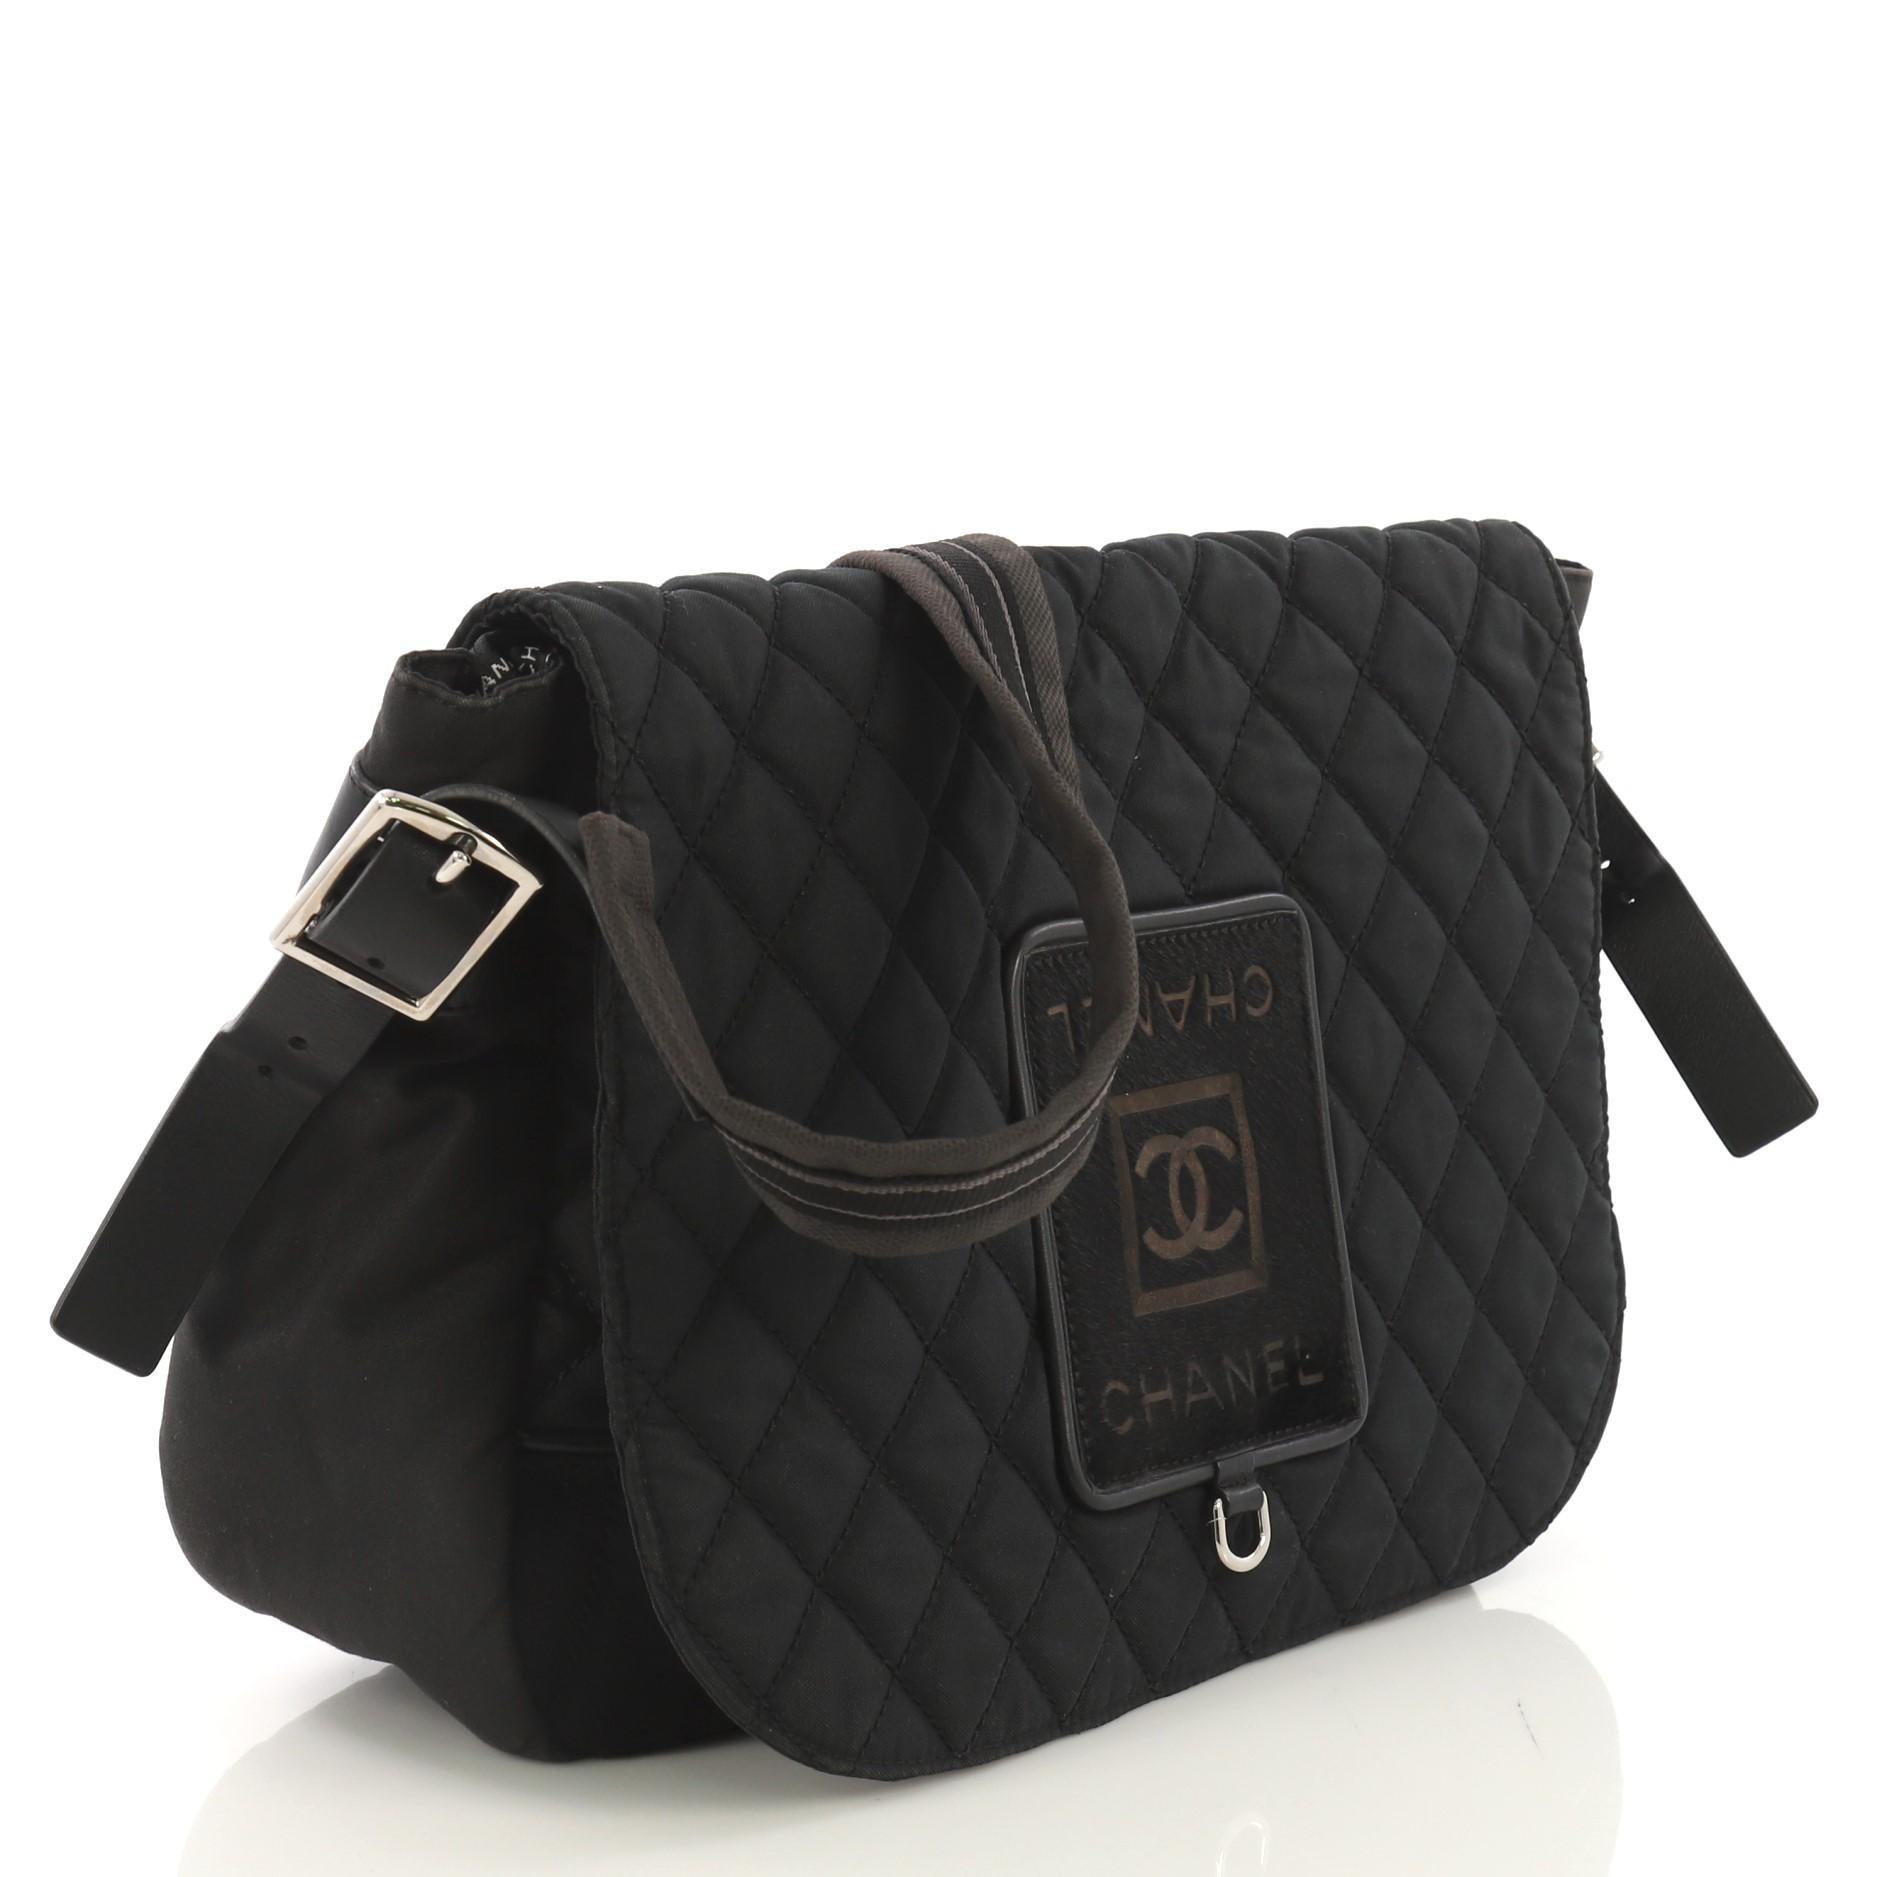 This Chanel Sport Line Messenger Bag Quilted Nylon with Pony Hair Large, crafted from black quilted nylon with pony hair, features CC logo on its front flap, cross-body strap, and silver-tone hardware. Its flap opens to a black nylon interior.